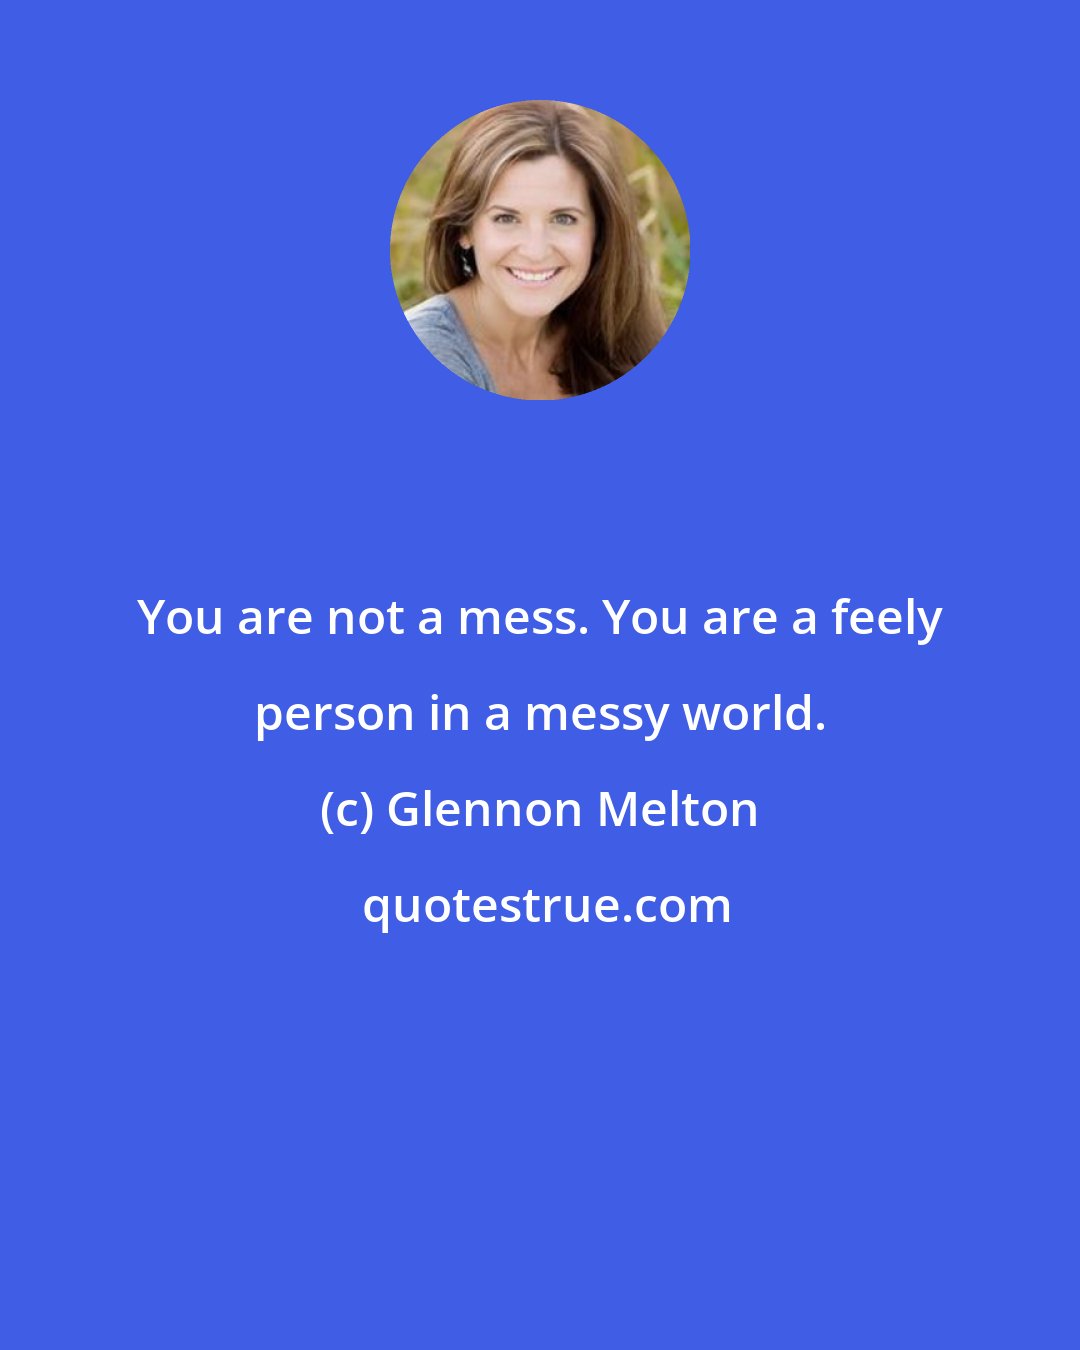 Glennon Melton: You are not a mess. You are a feely person in a messy world.